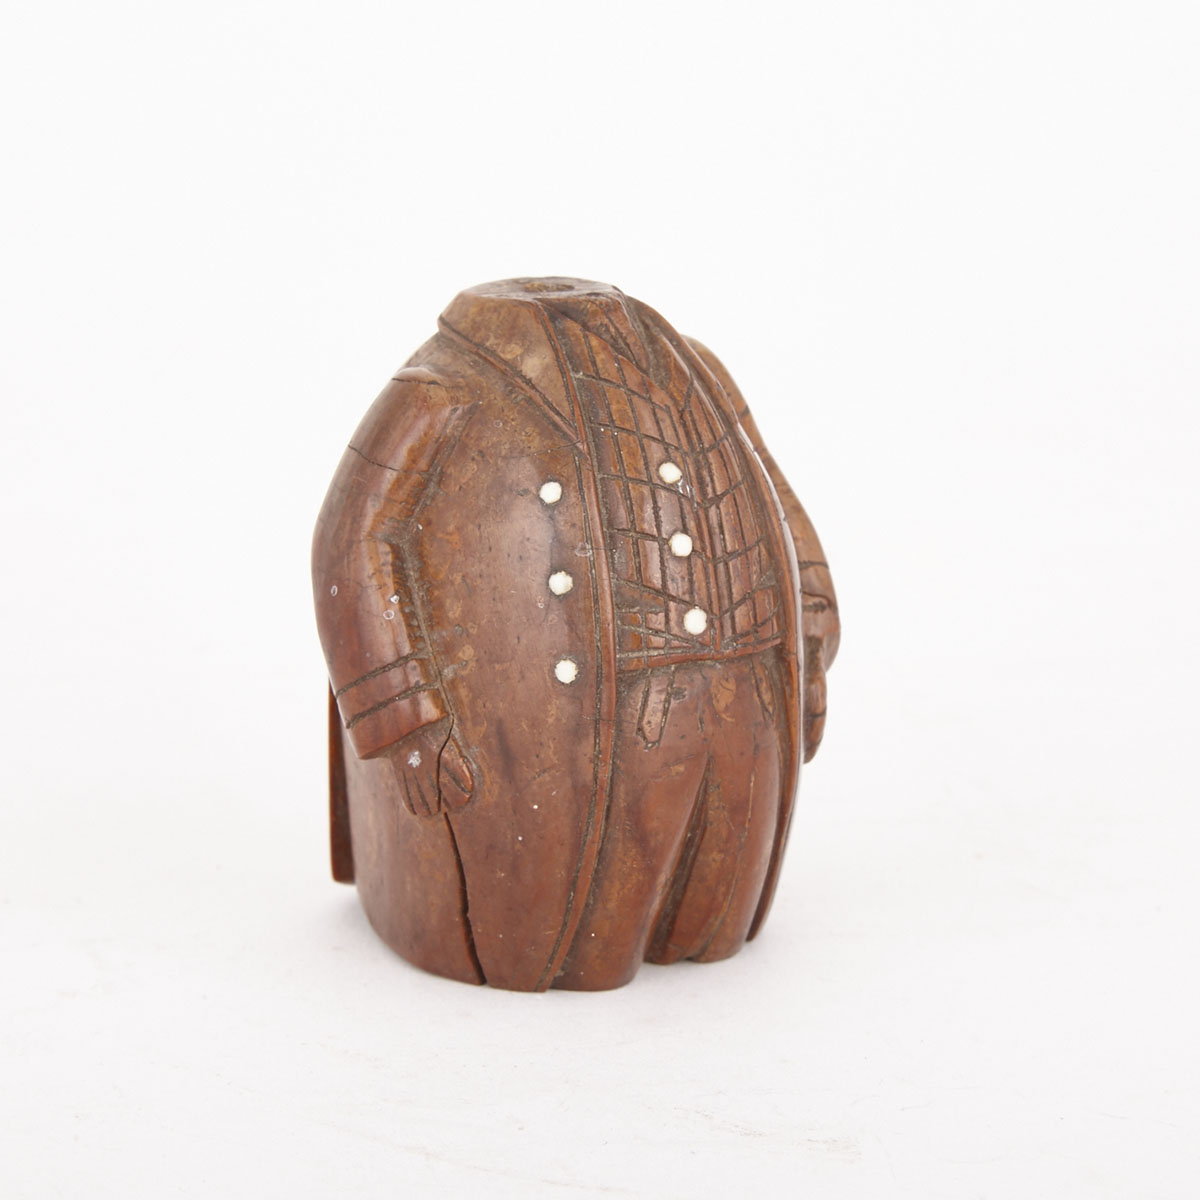 English Carved Elm Figural Character Snuff Box, late 18th/early 19th century